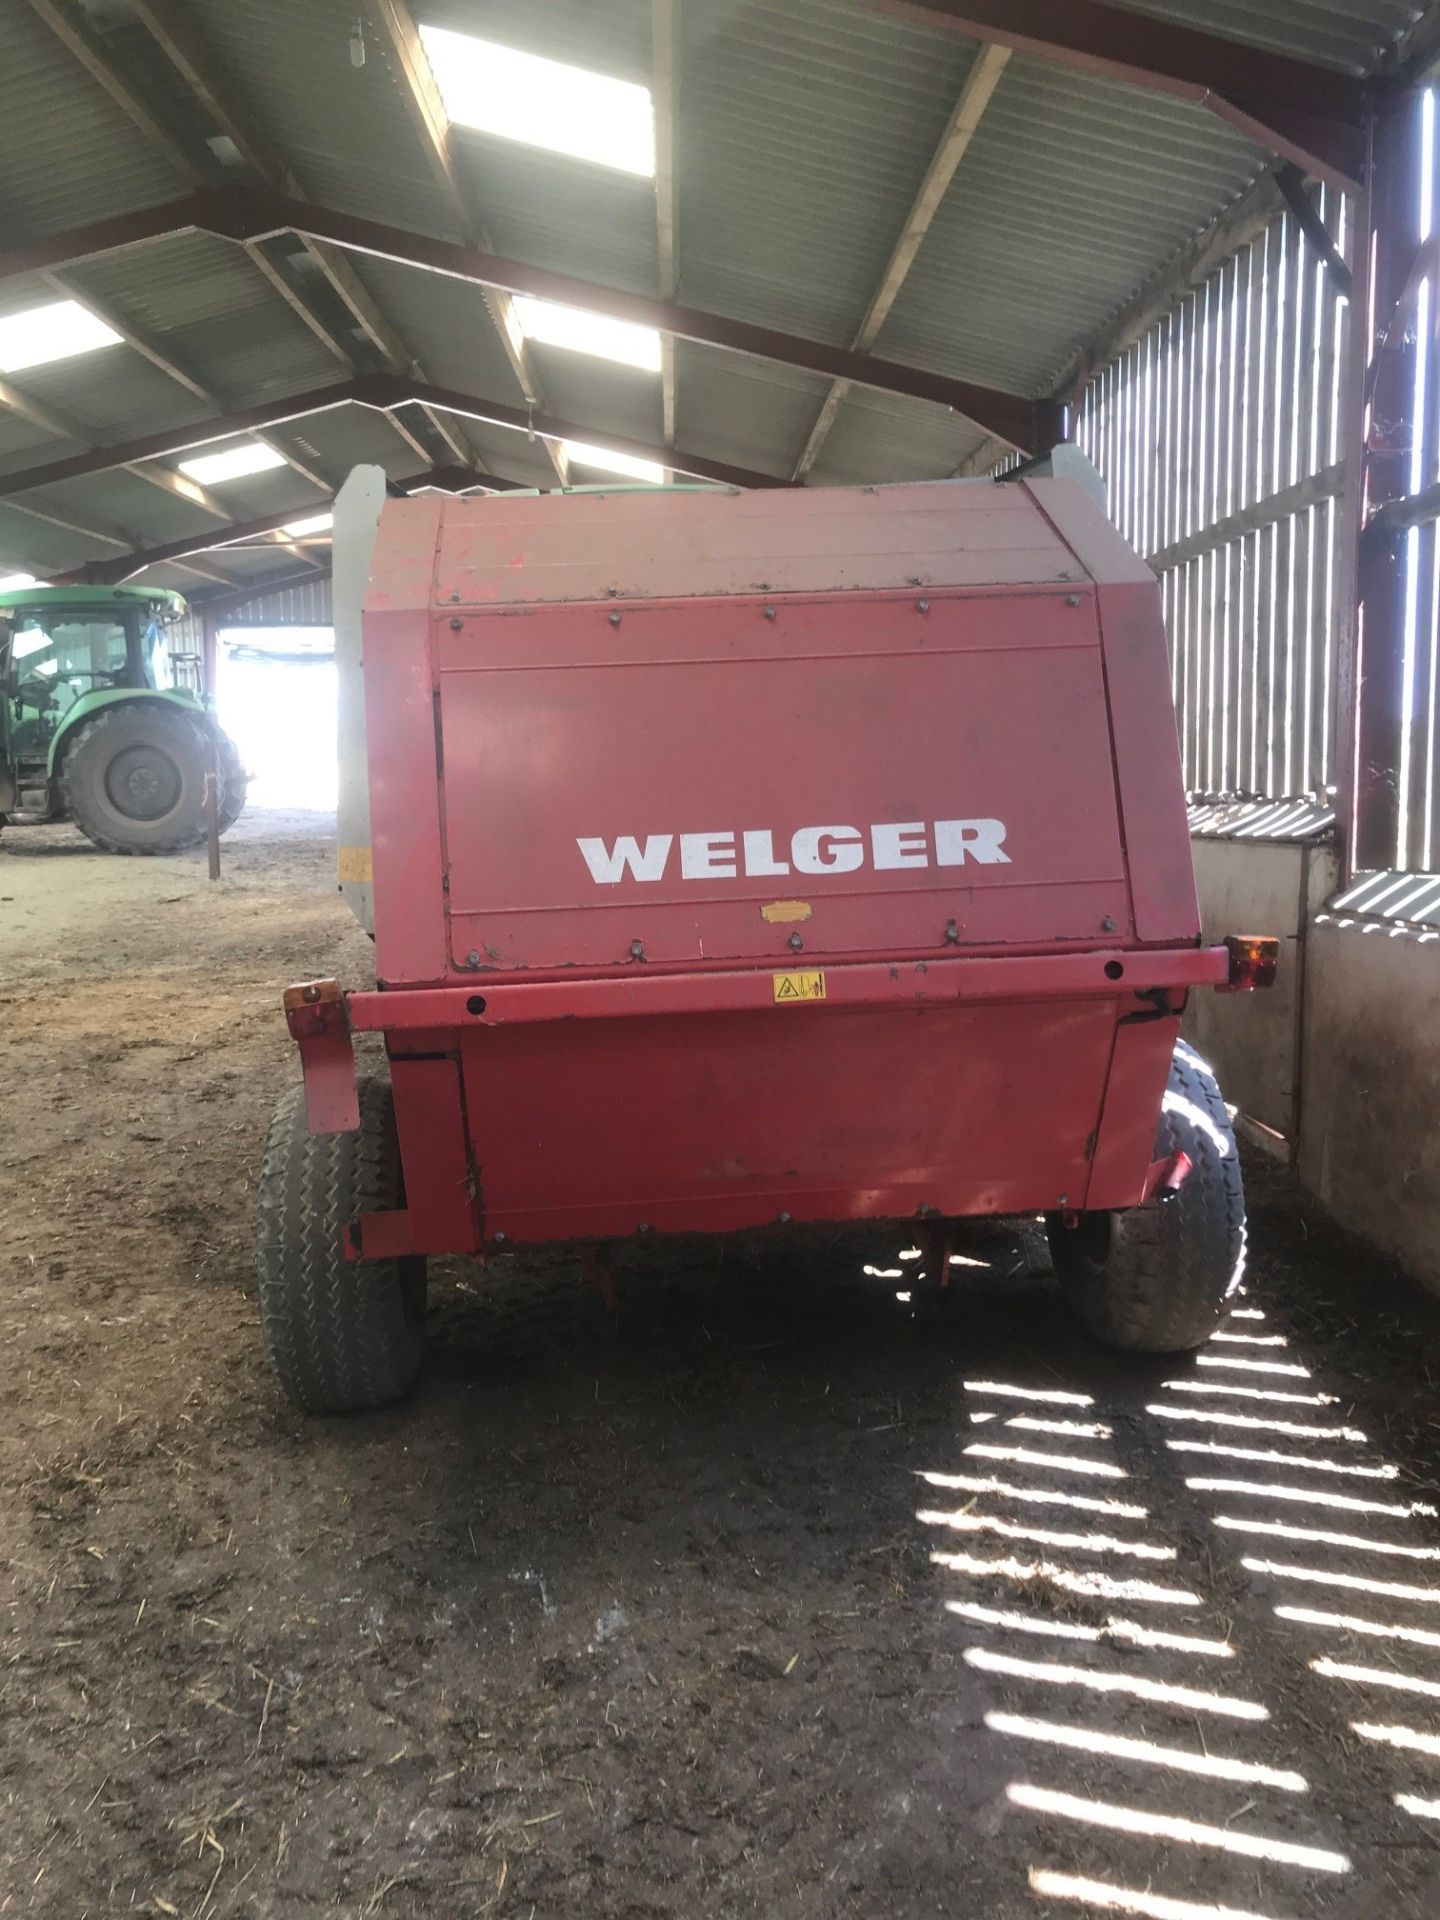 2004 WELGER 202 CLASSIC ROUND BALER - Image 7 of 10